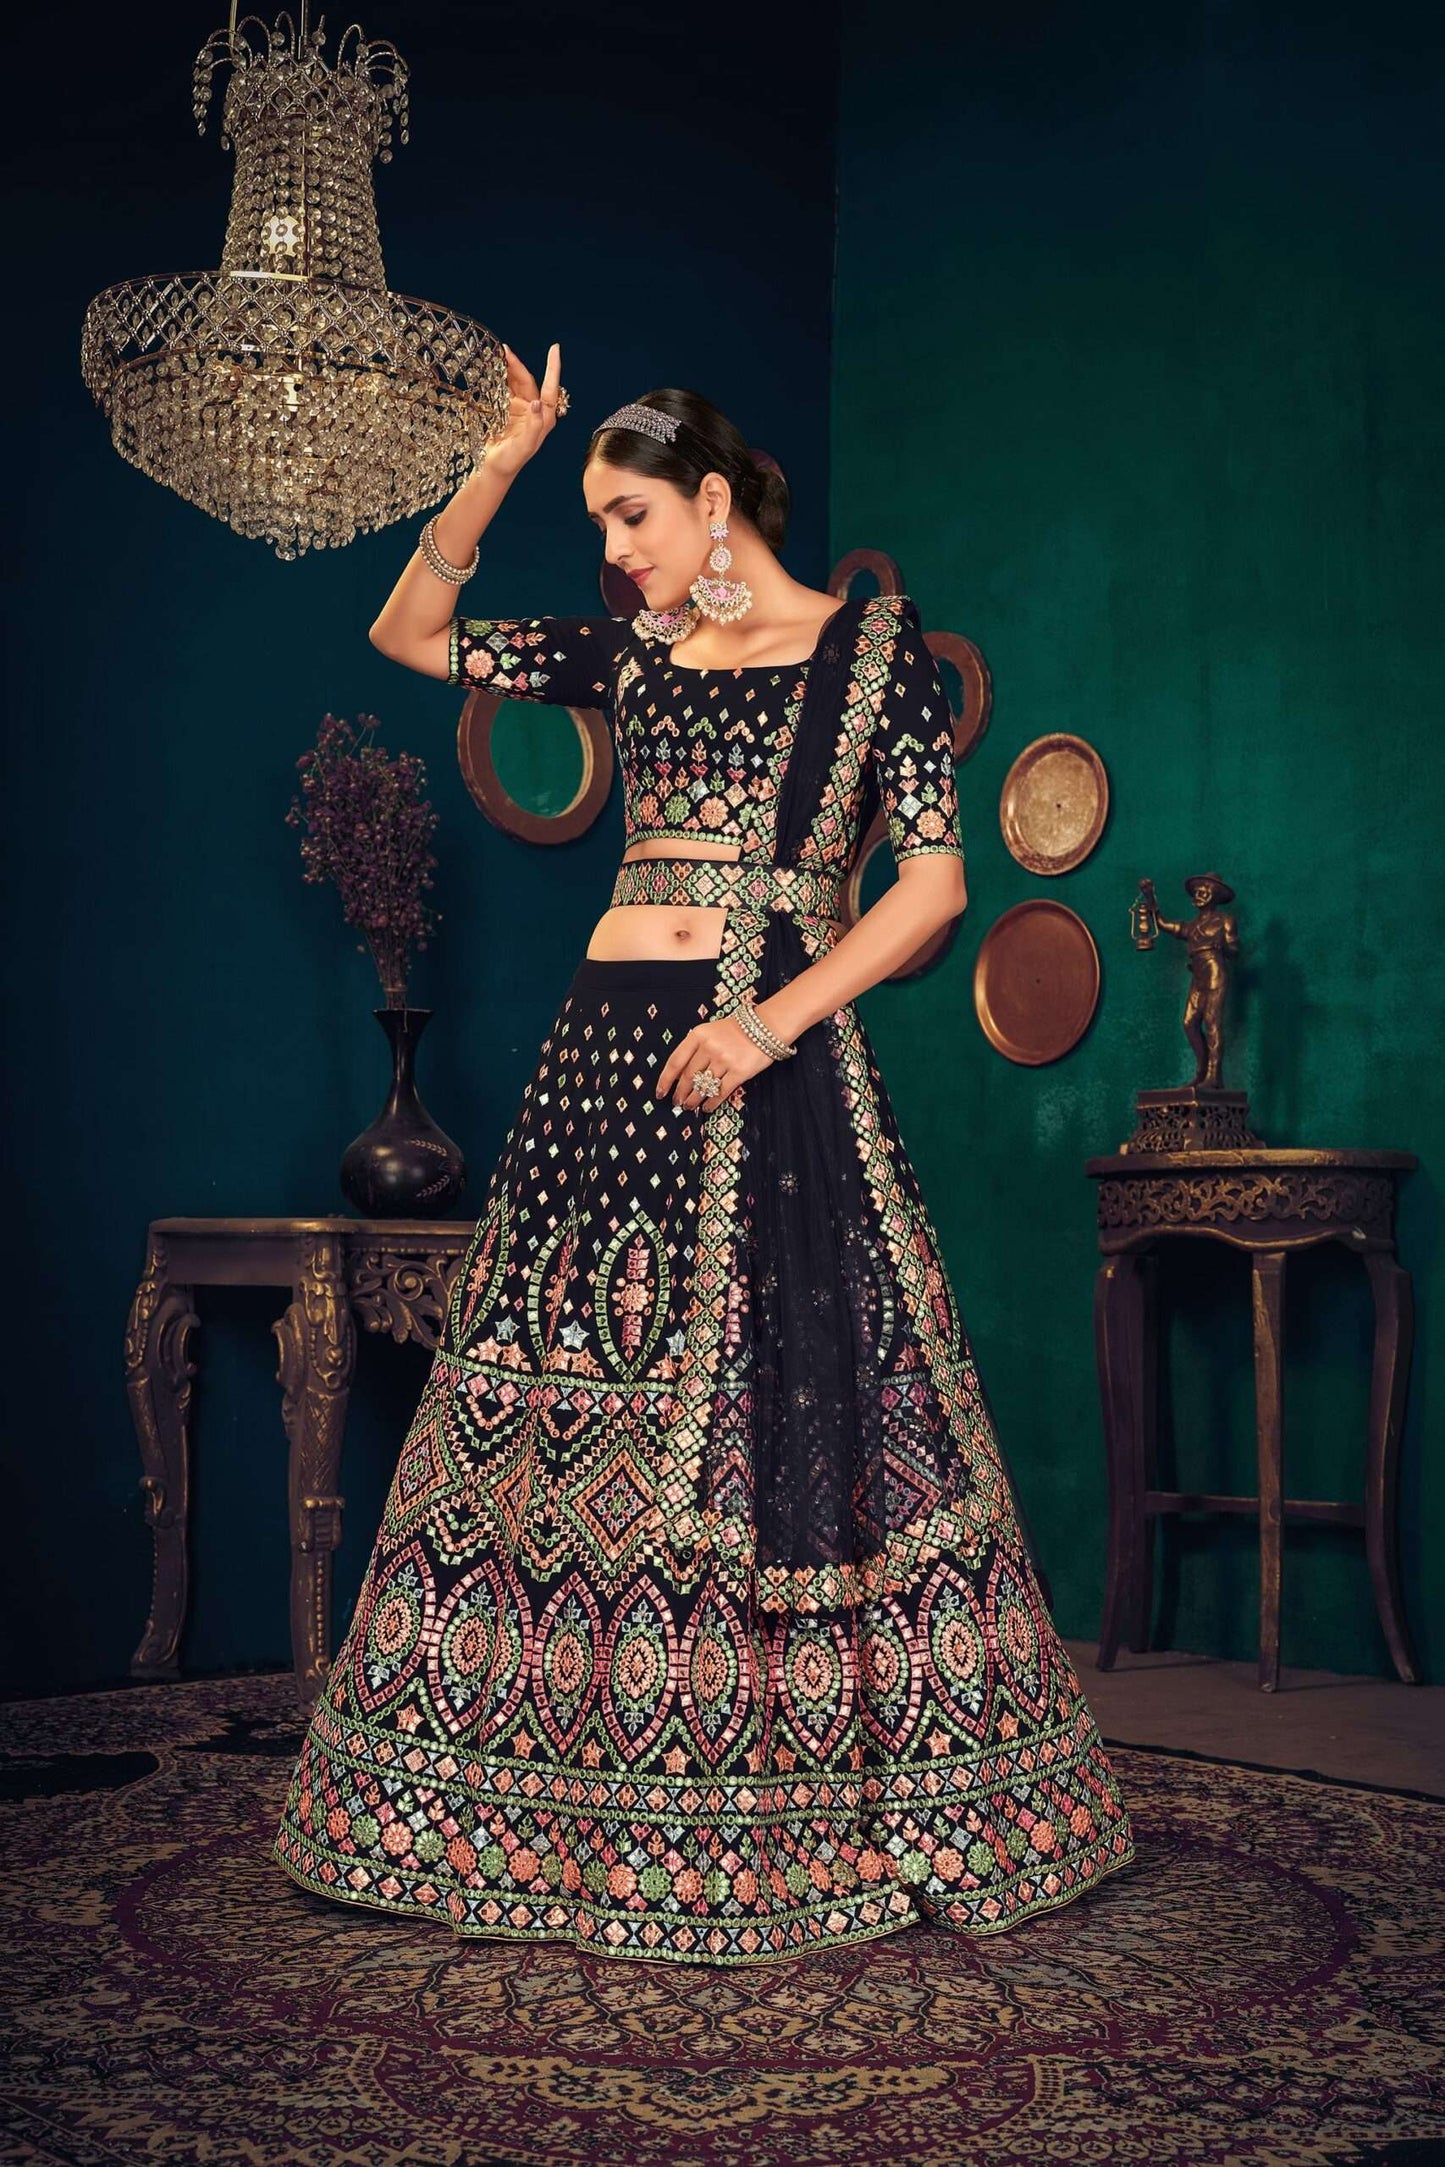 Navy Blue Lehenga Choli With Heavy Hand Embellished Moroccan And Floral Pattern